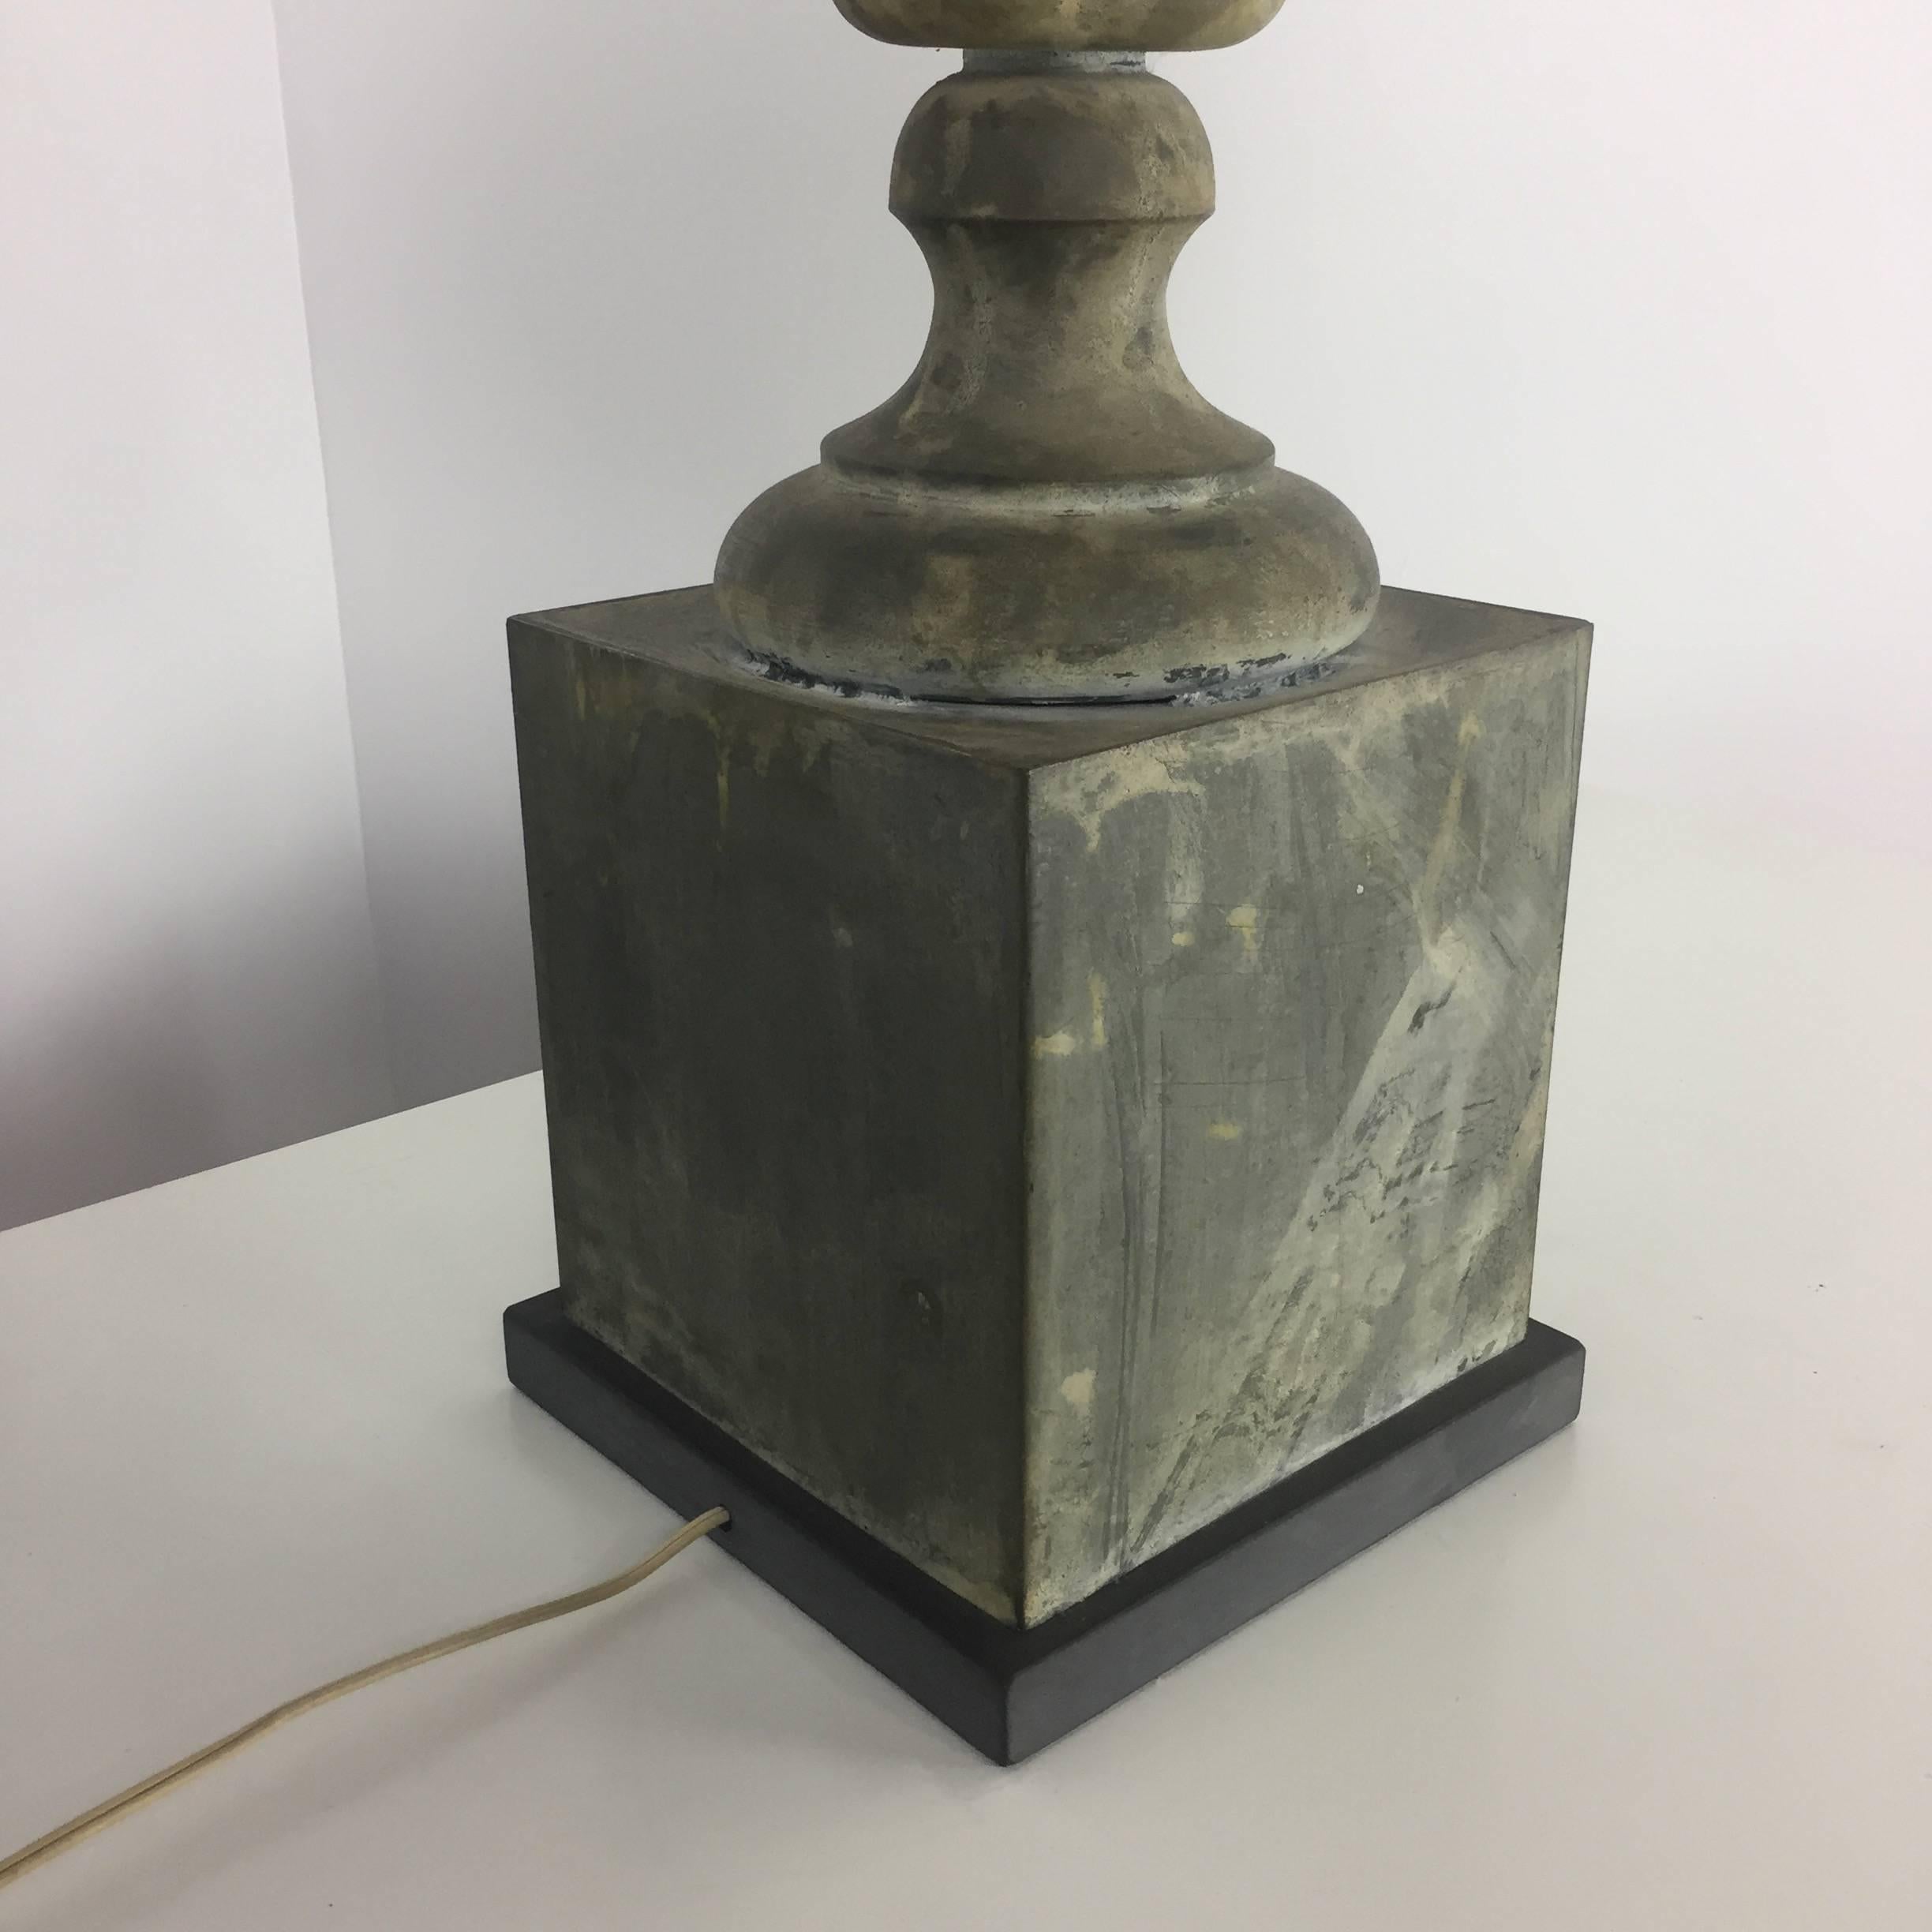 20th Century Architectural Zinc Table Lamps of a Substantial Size in the Style of Parzinger